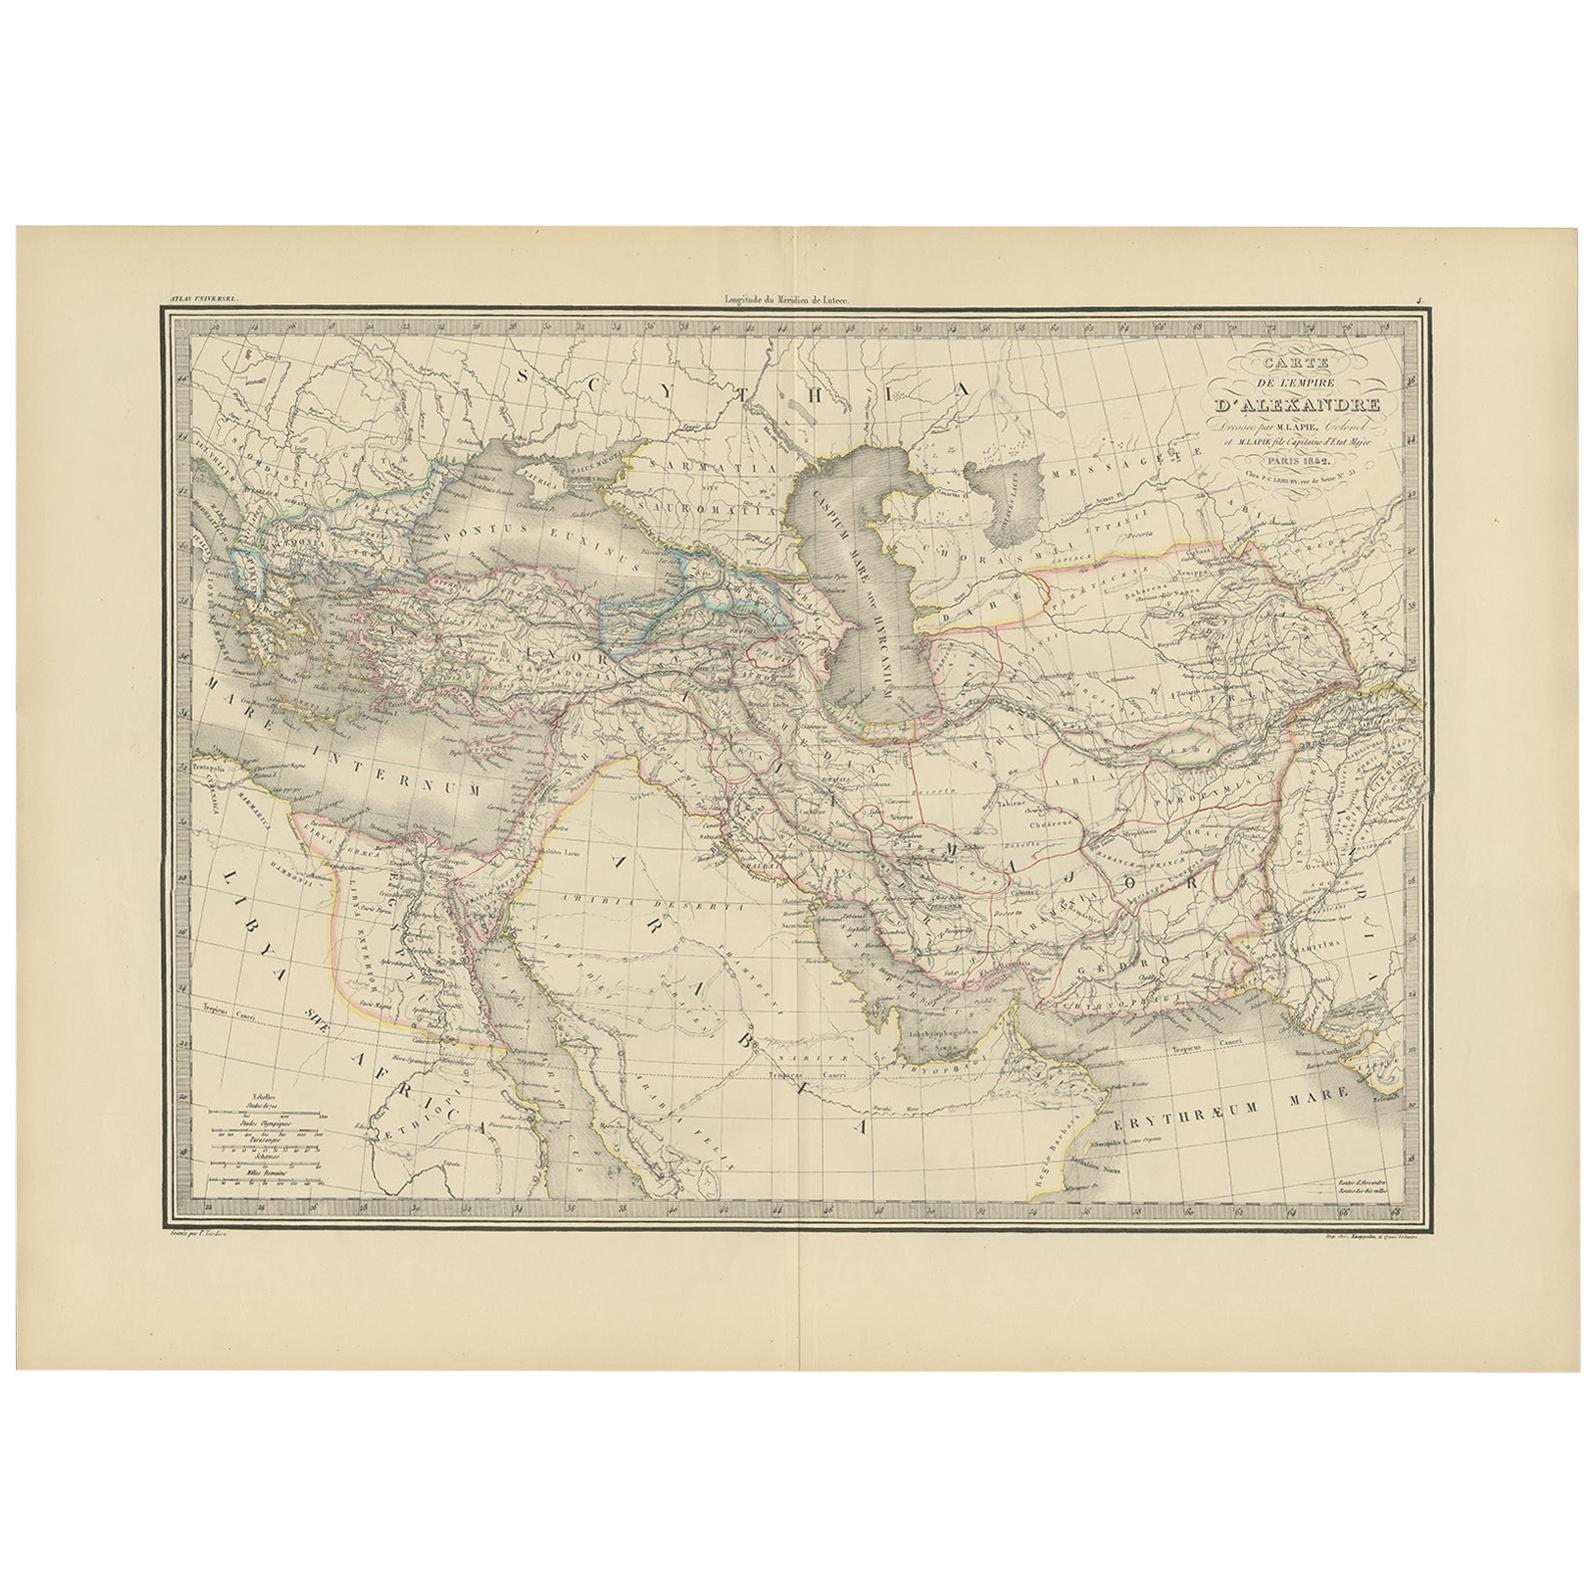 Antique Map of the Empire of Alexander the Great by Lapie, 1842